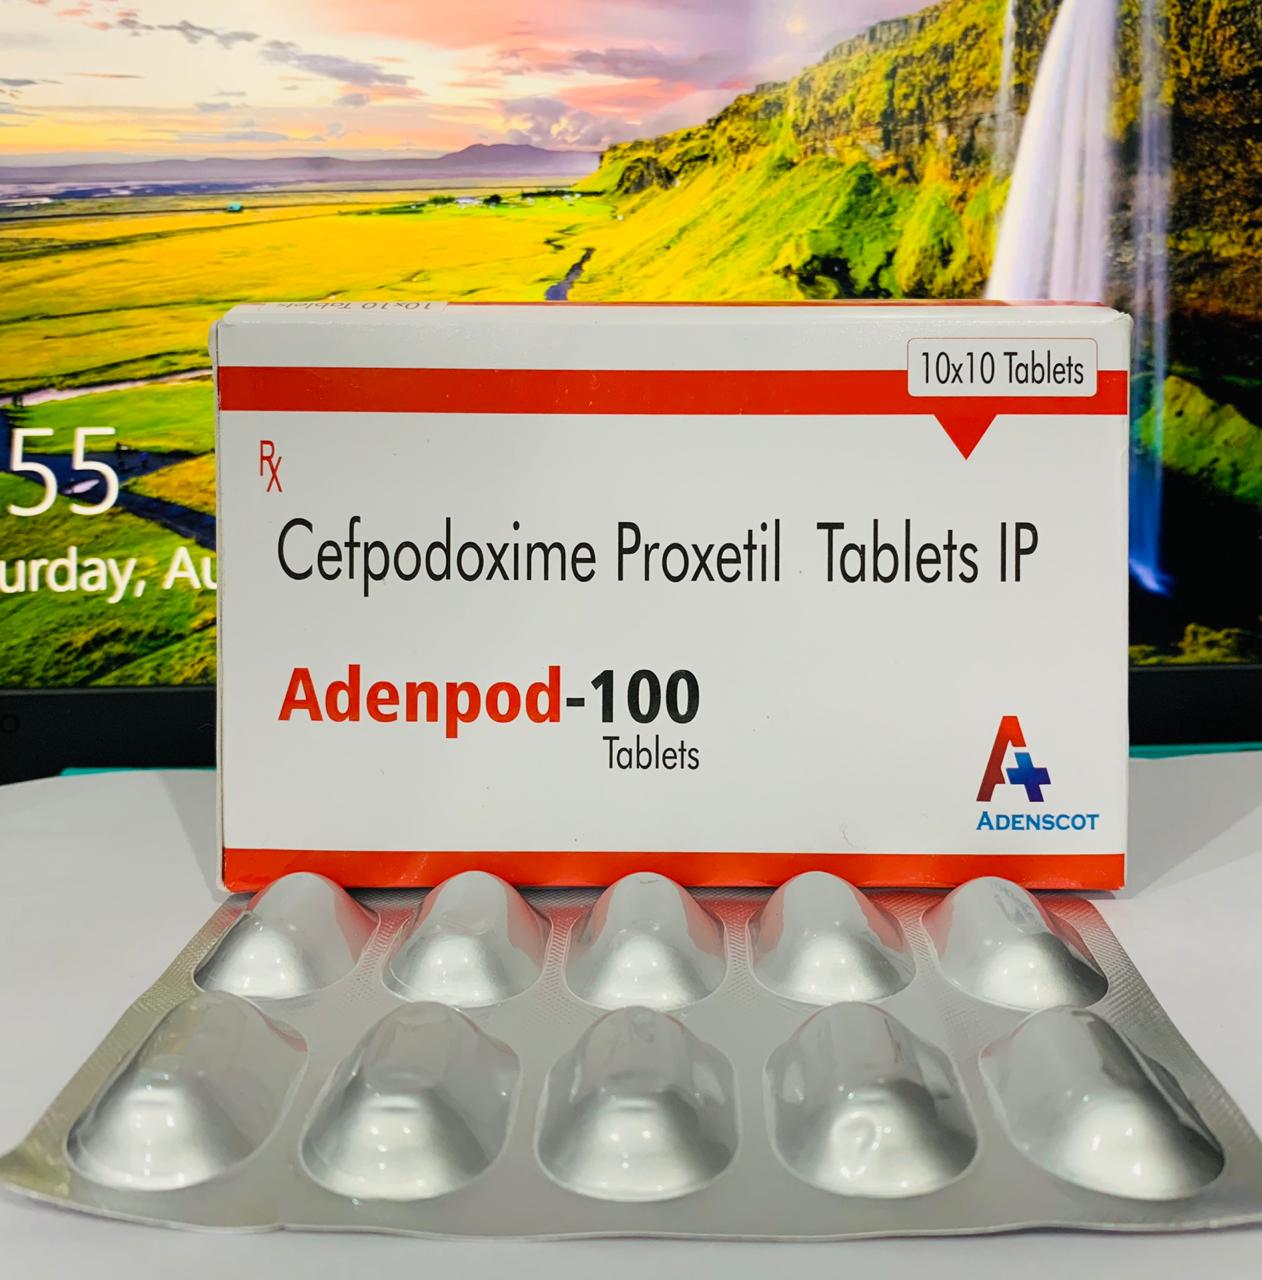 Product Name: Adenpod 100, Compositions of Adenpod 100 are Cefixime Proxetil Tablets IP - Adenscot Healthcare Pvt. Ltd.